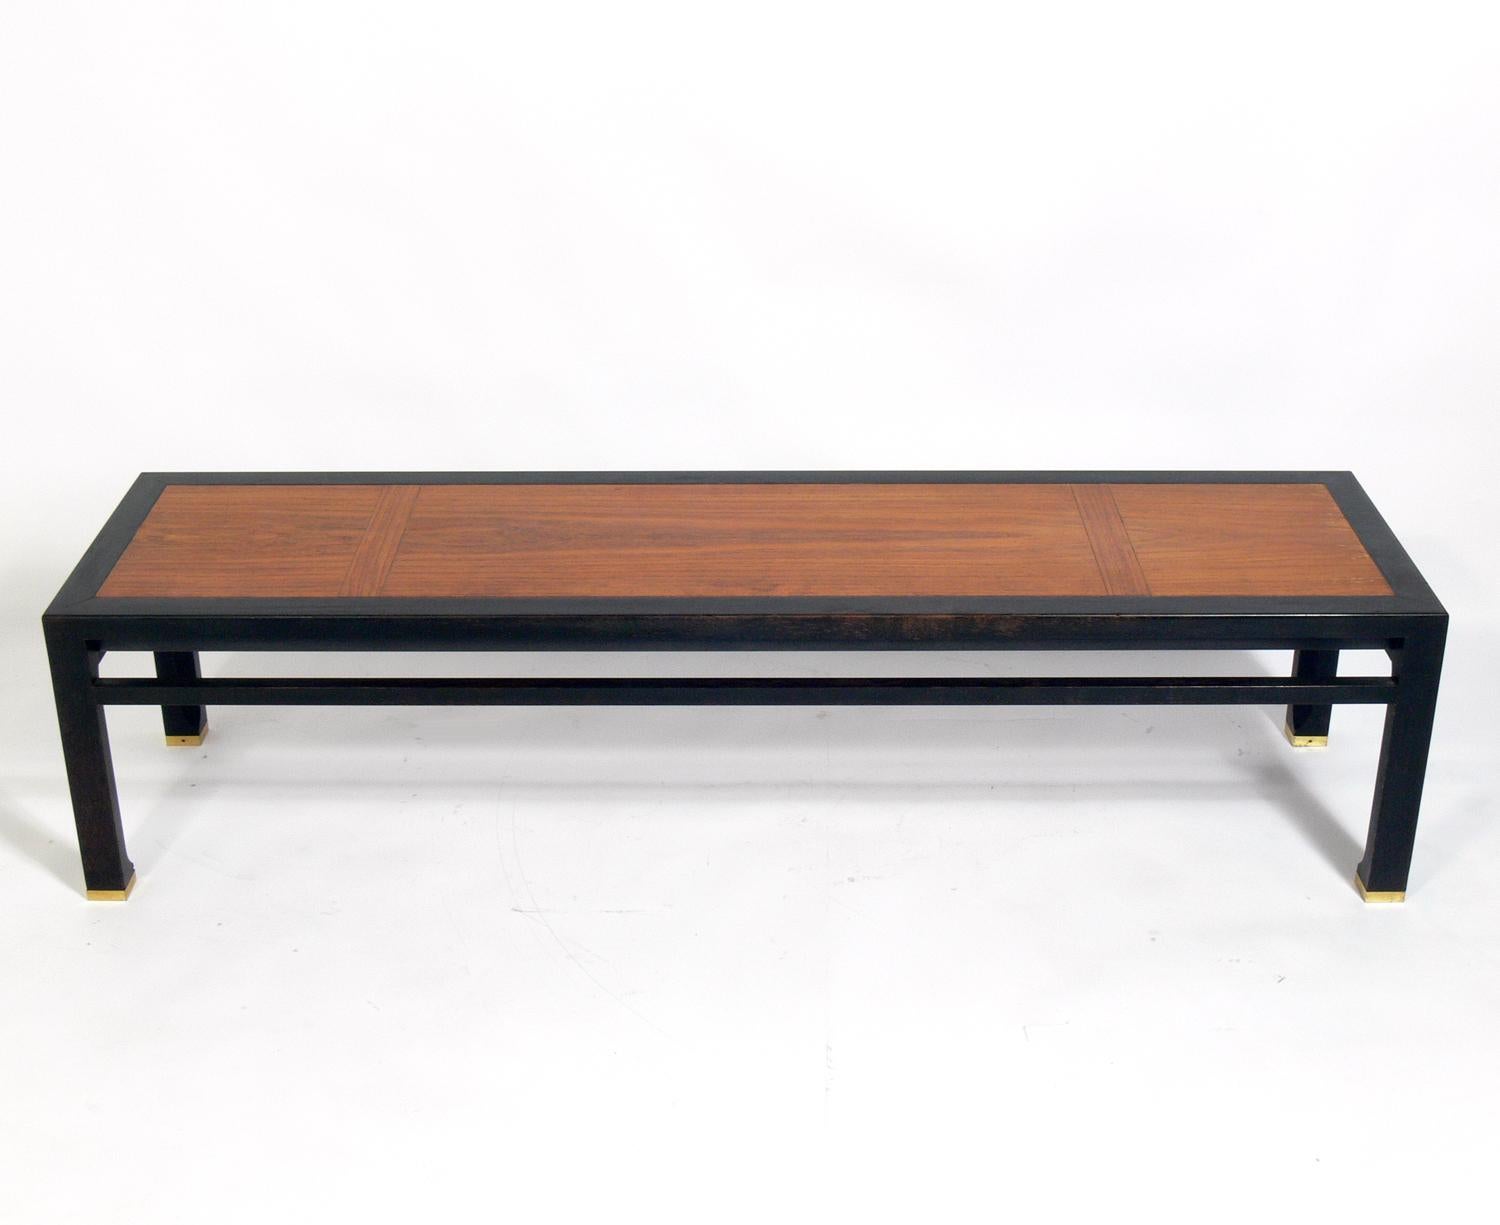 Asian influenced or chinoiserie coffee table, designed by Michael Taylor for Baker, American, circa 1960s. This table is currently being refinished and will look incredible when completed. The price noted includes refinishing.